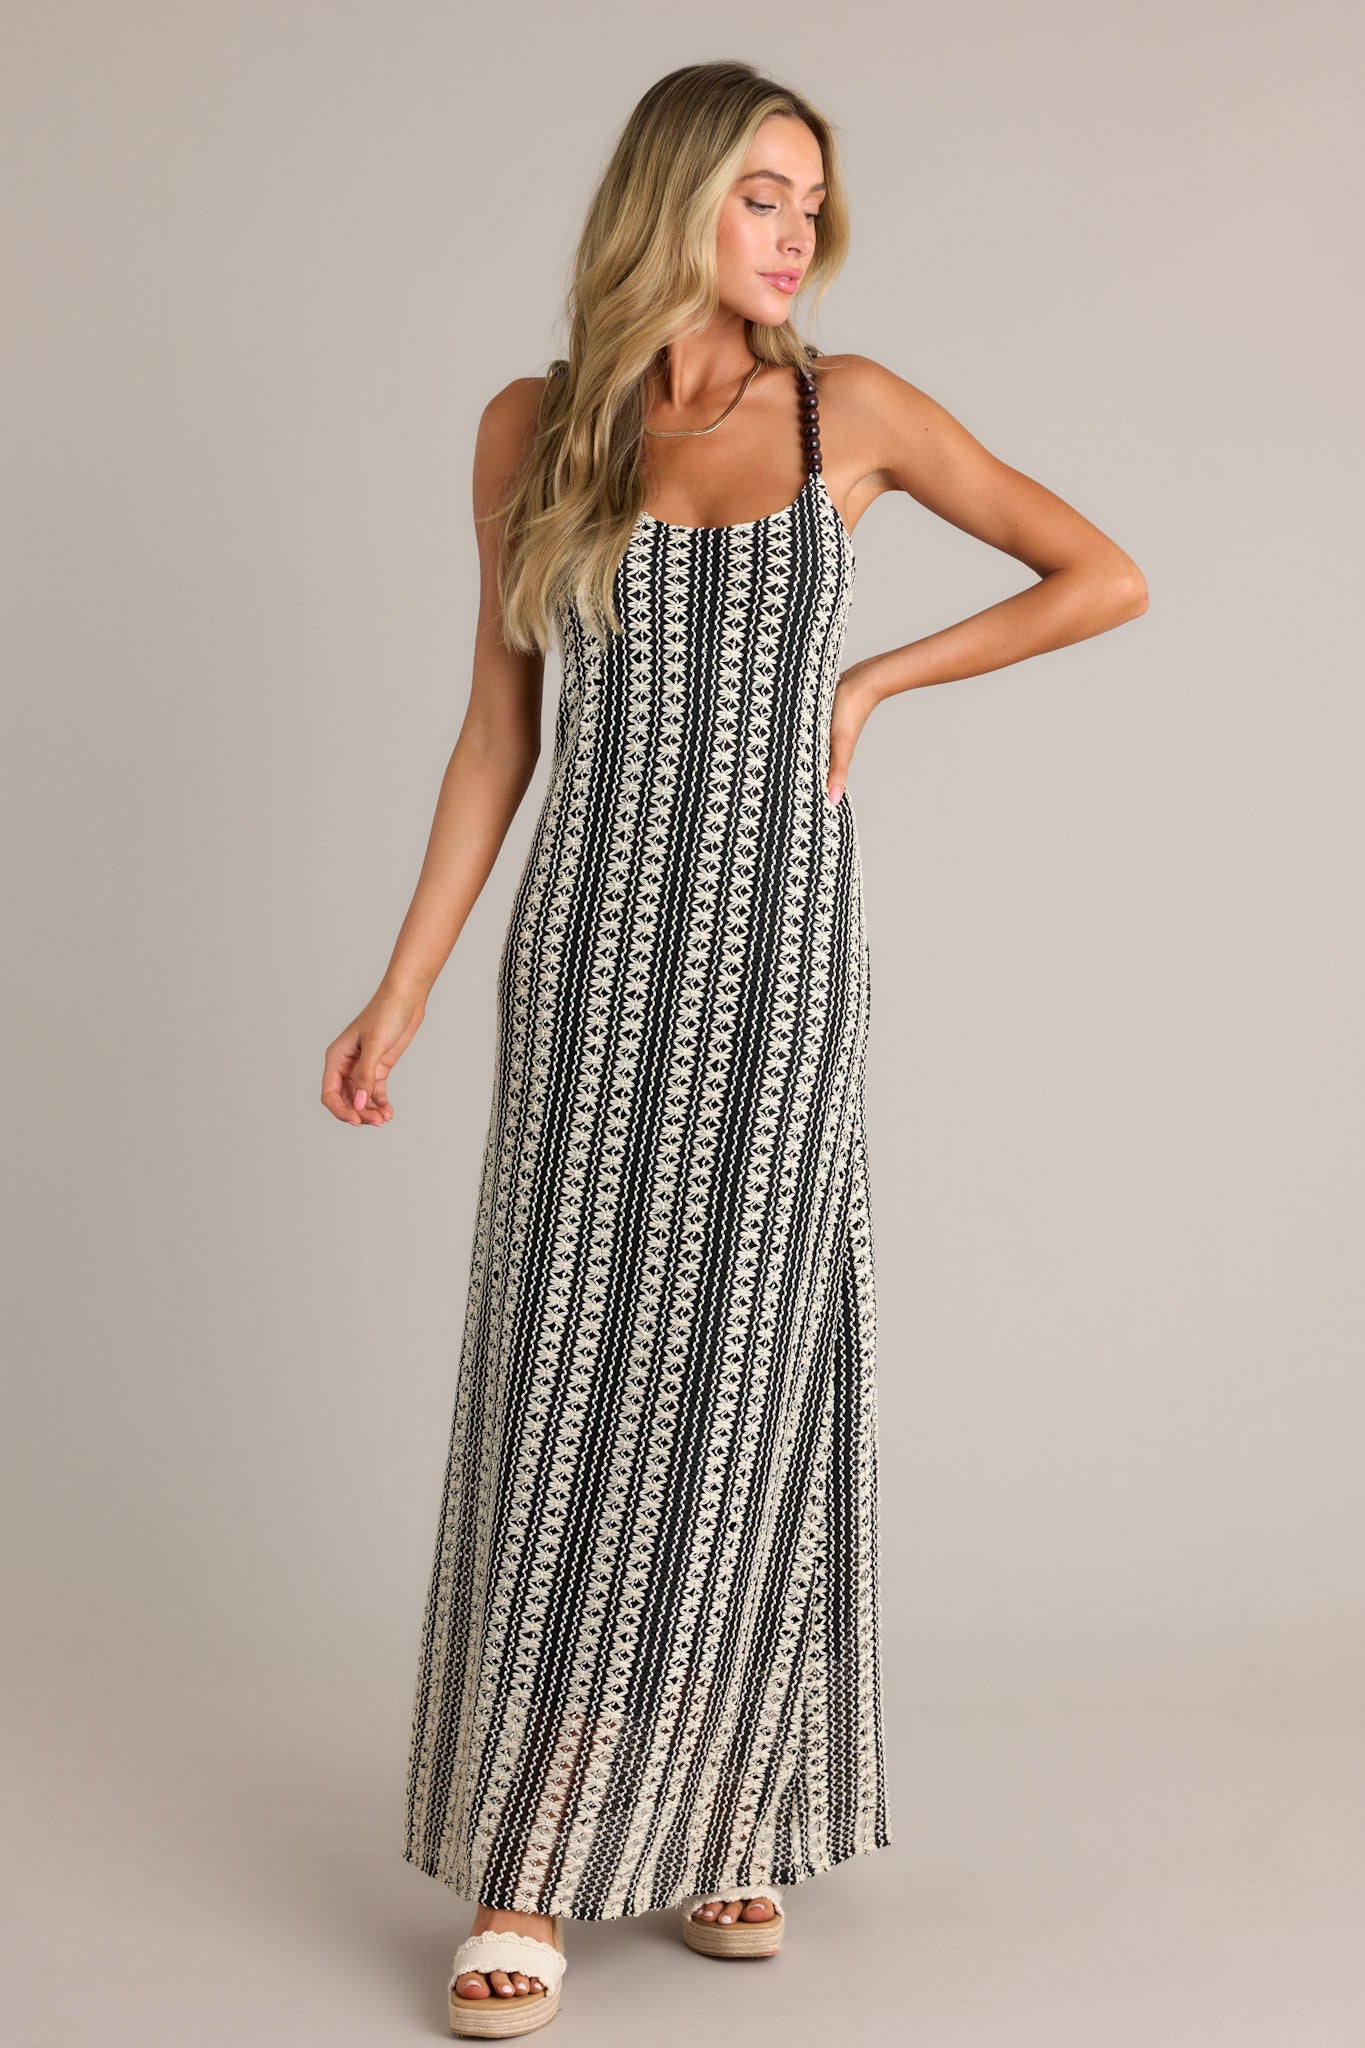 Action shot of a black stripe maxi dress displaying the fit and movement, highlighting the scoop neckline, fully beaded straps, knitted design, and vertical stripe pattern.